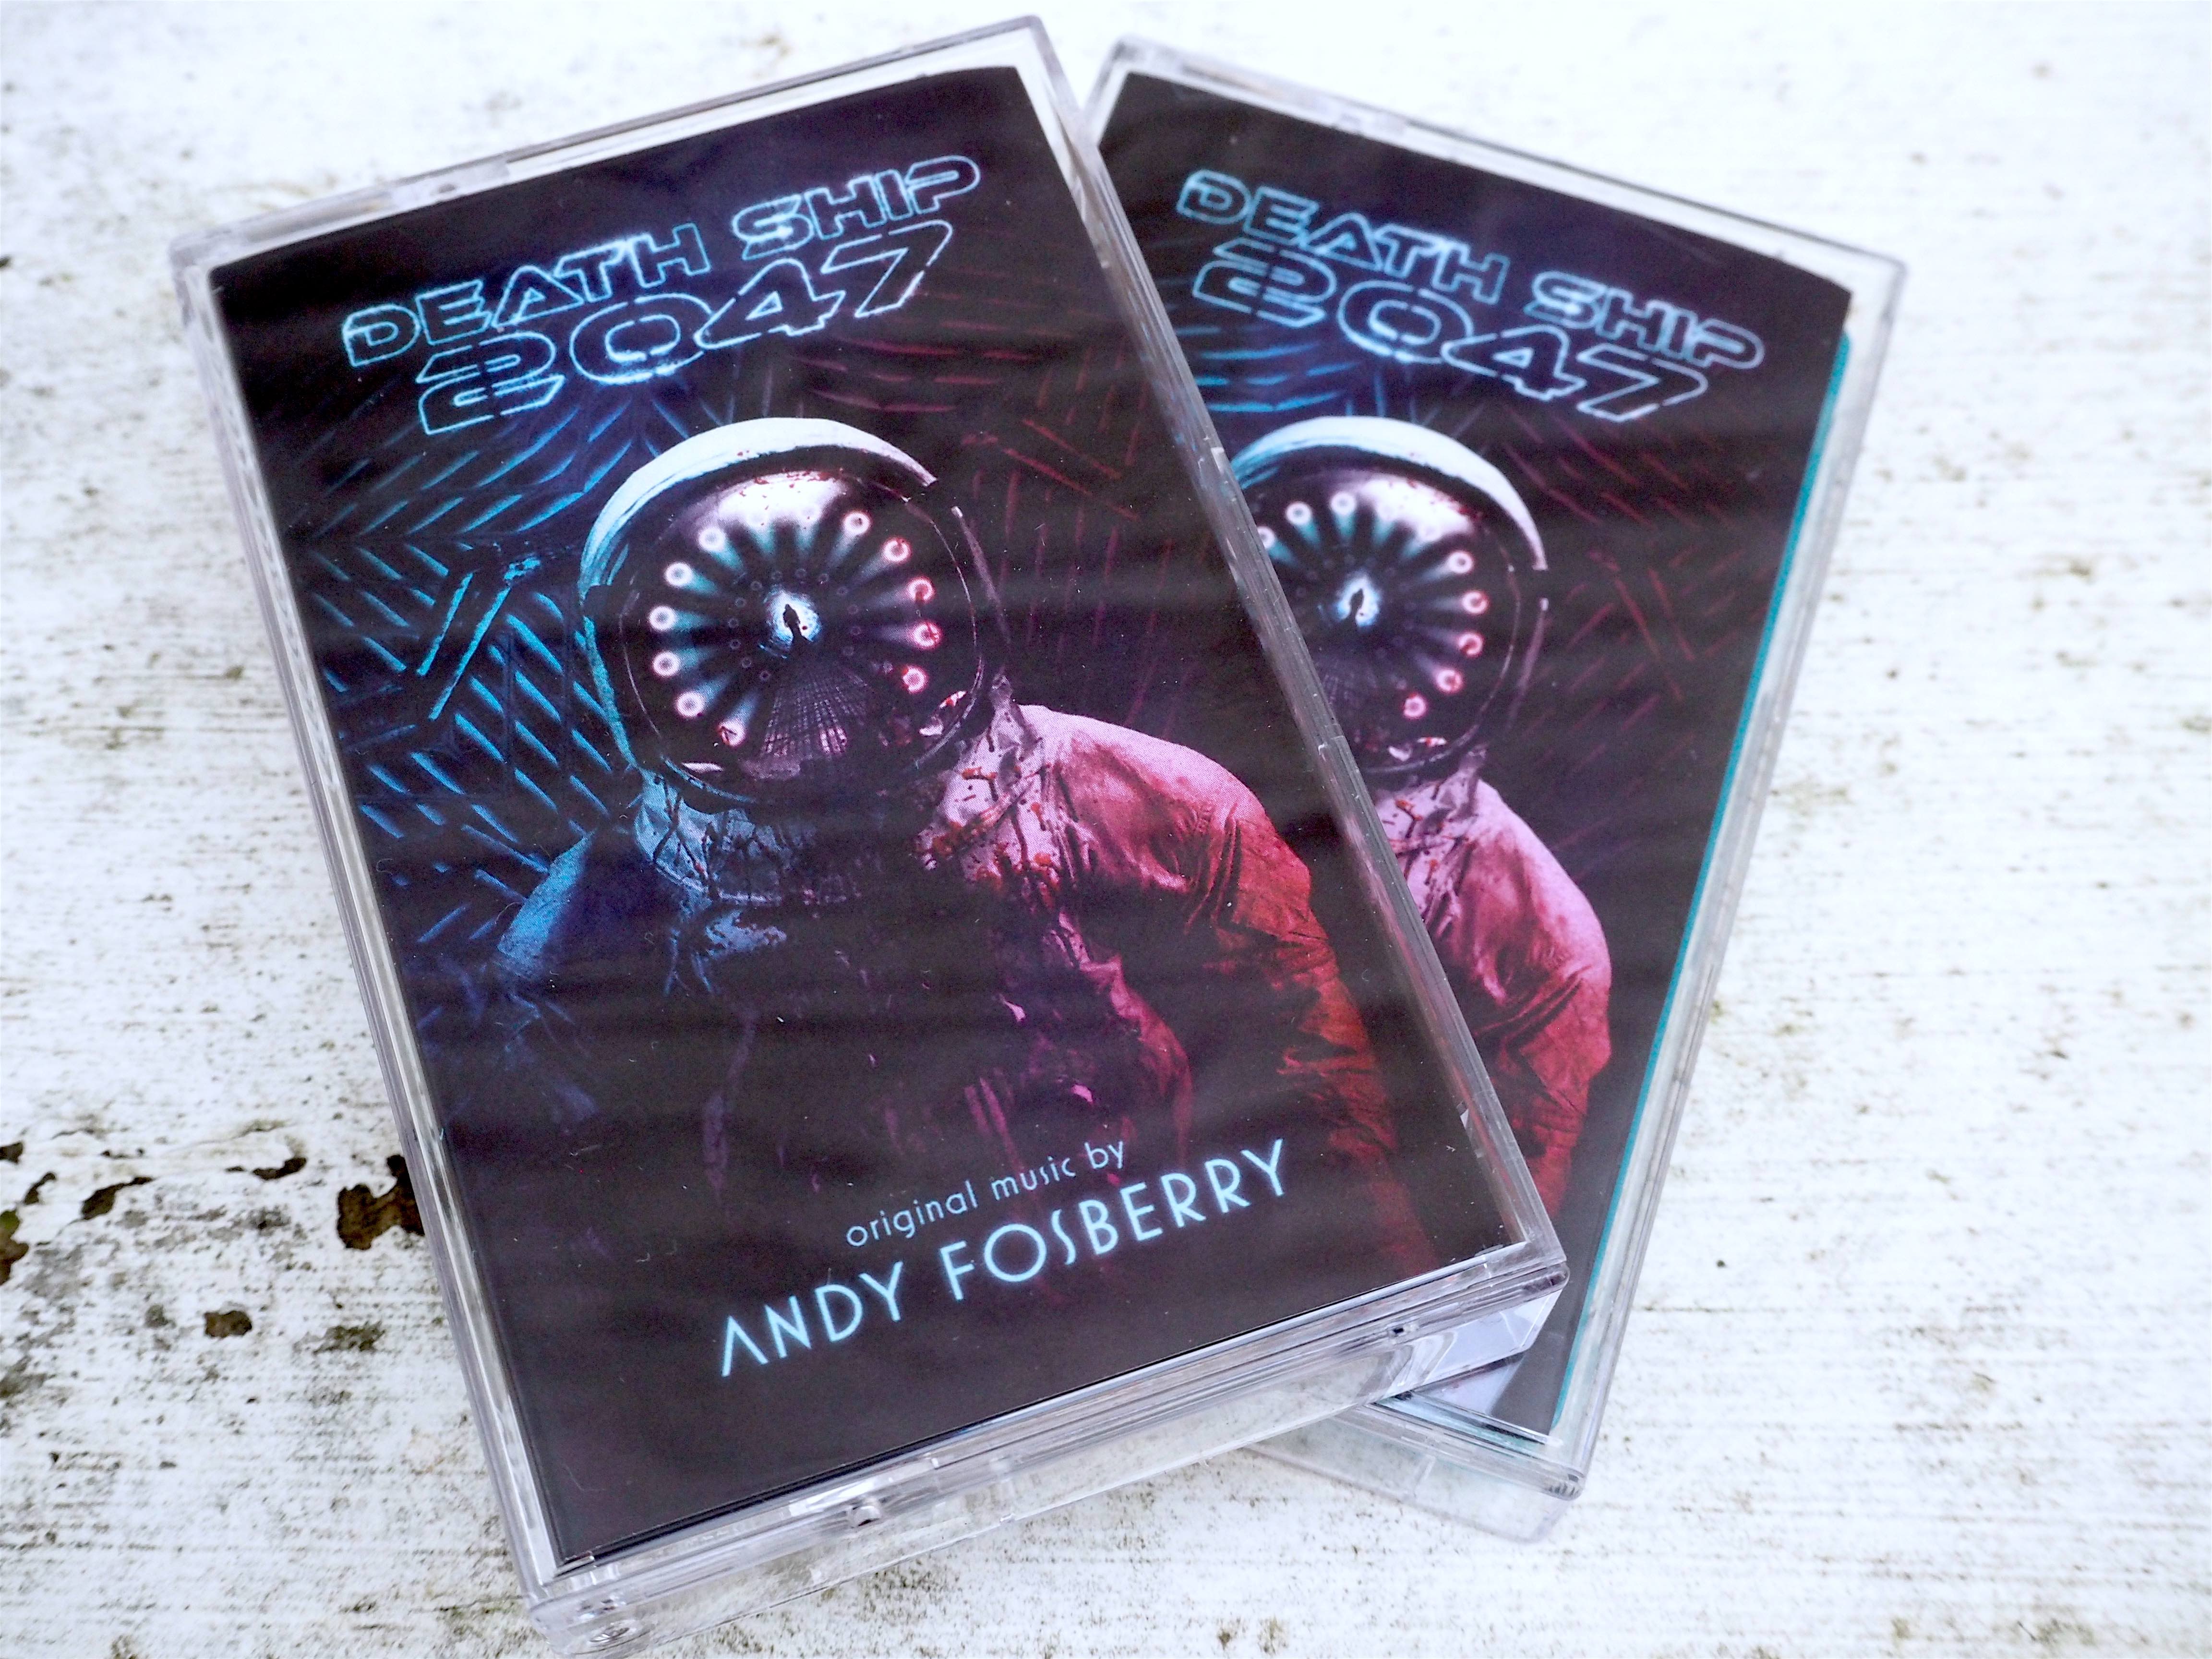 Andy Fosberry Death Ship 2047 cassette Spun Out Of Control copy.jpg